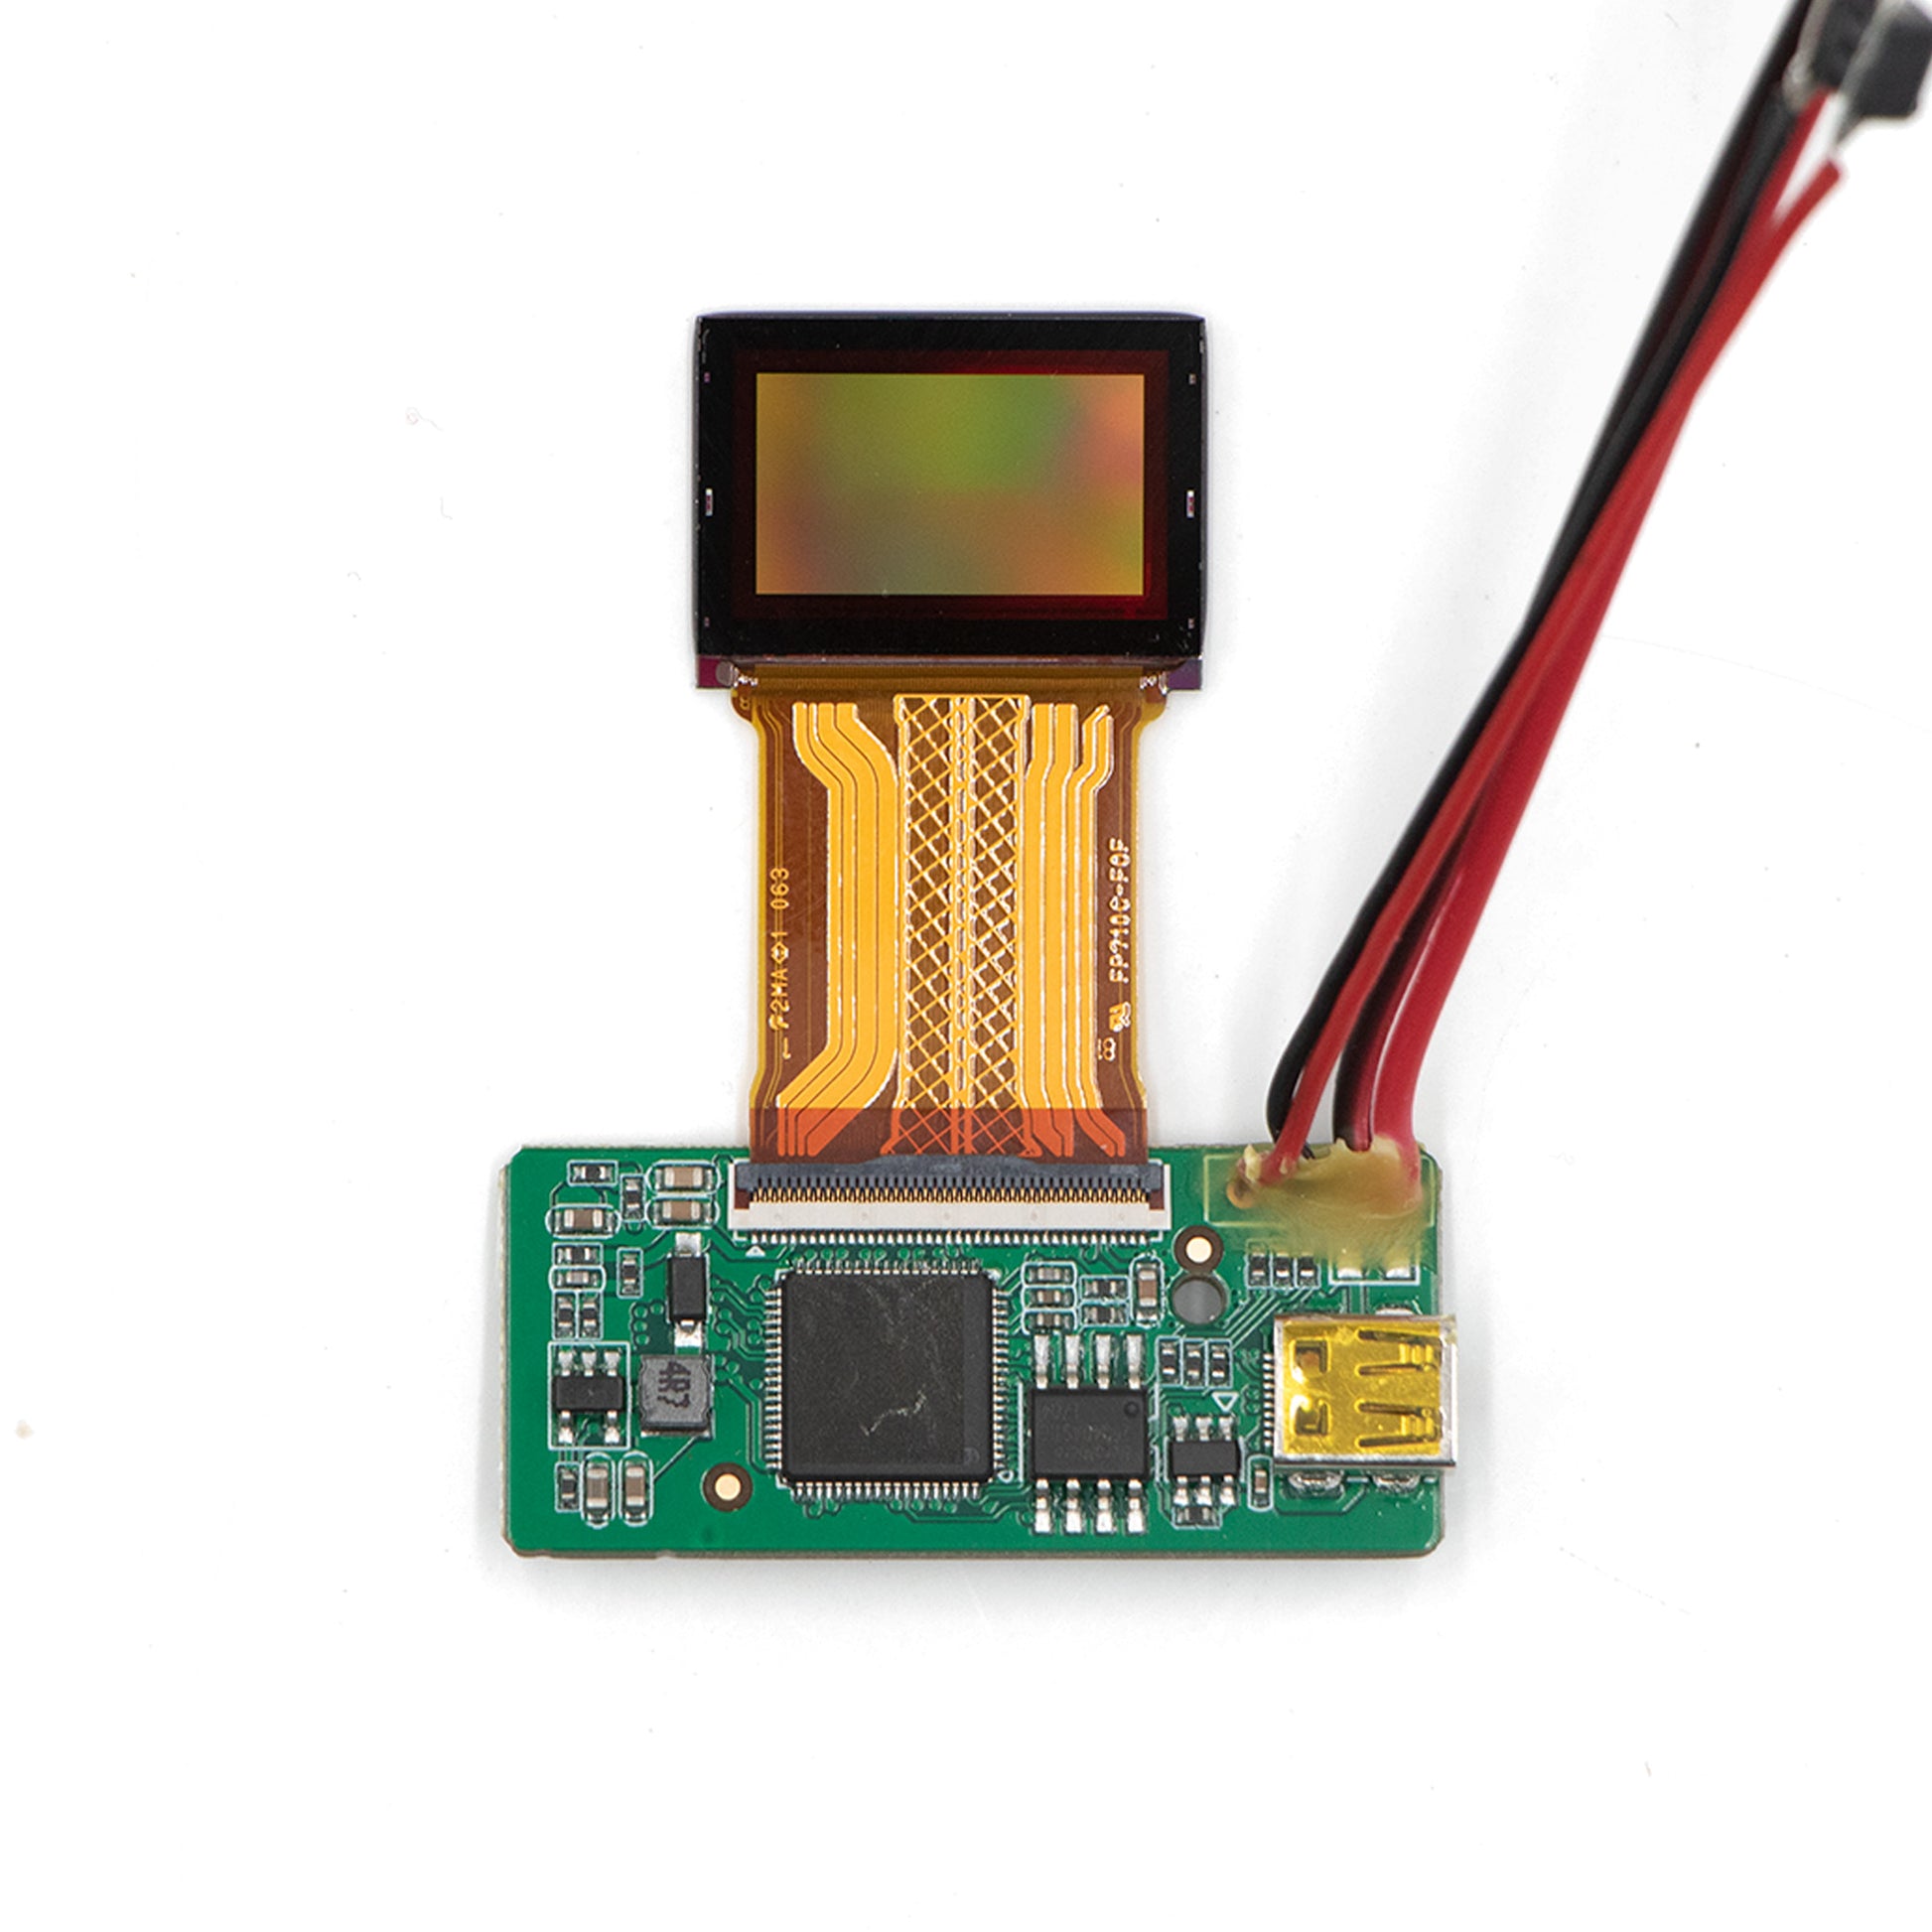 HDMI to LVDS adapter board connected to single micro screen